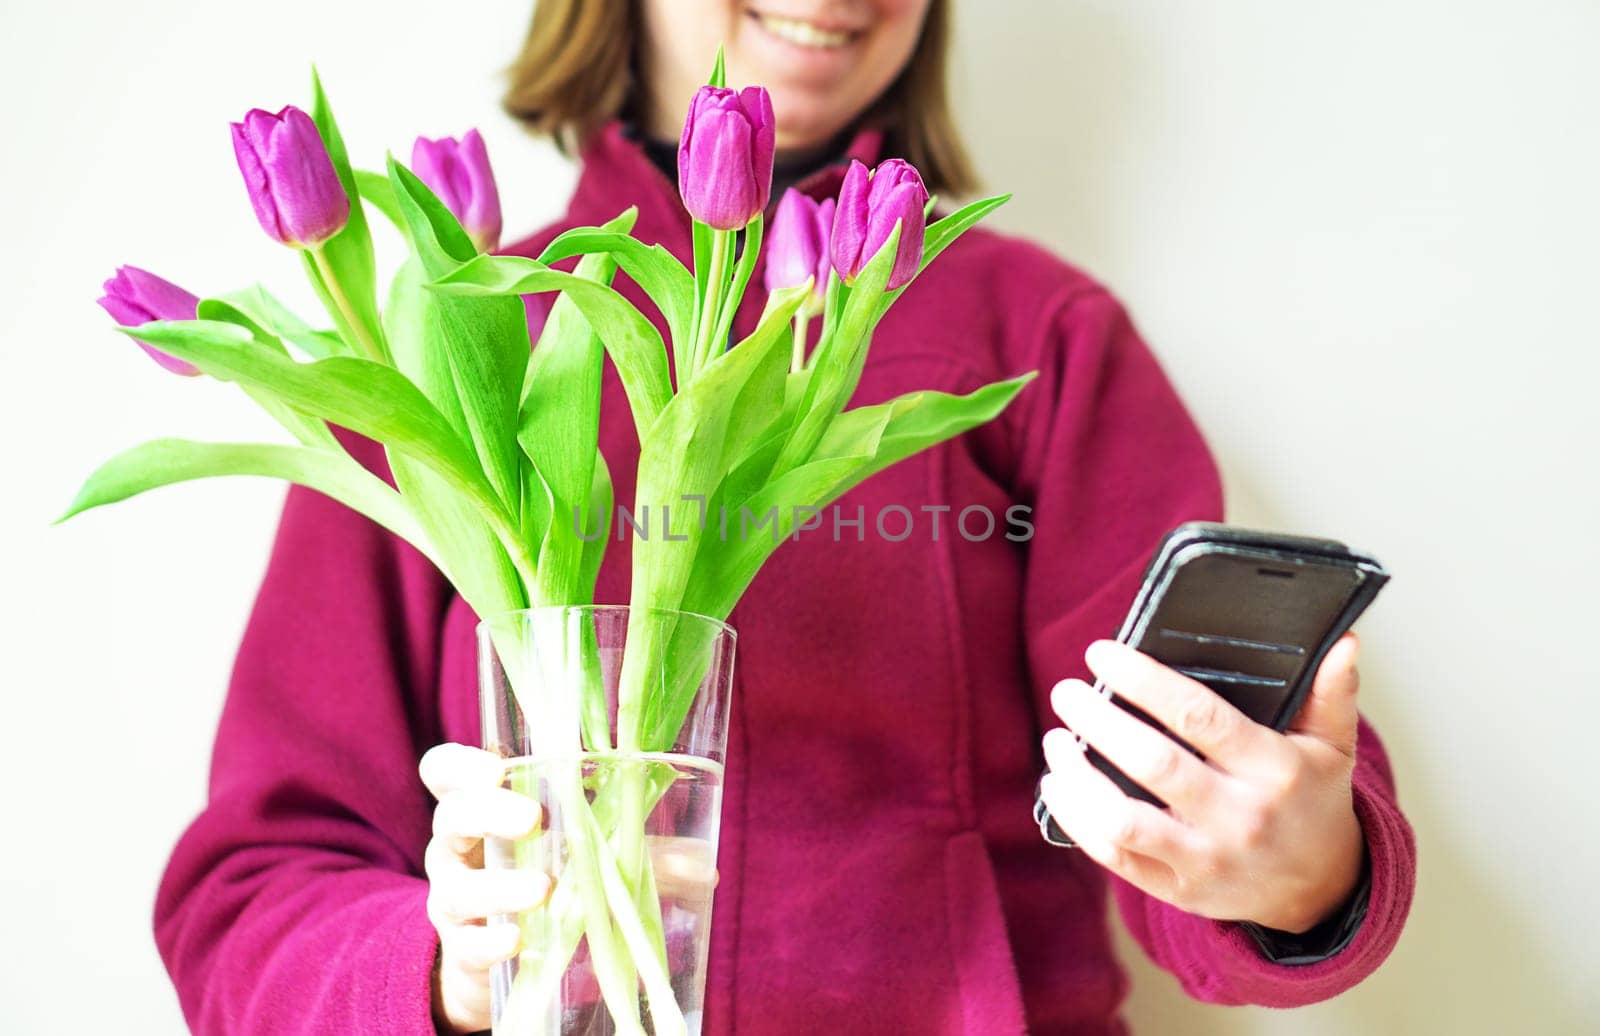 Beautiful girl in cozy purple jacket with magenta tulips in a vase is smiling and taking a selfie picture on her phone. Indoor photo. No face. High quality photo.